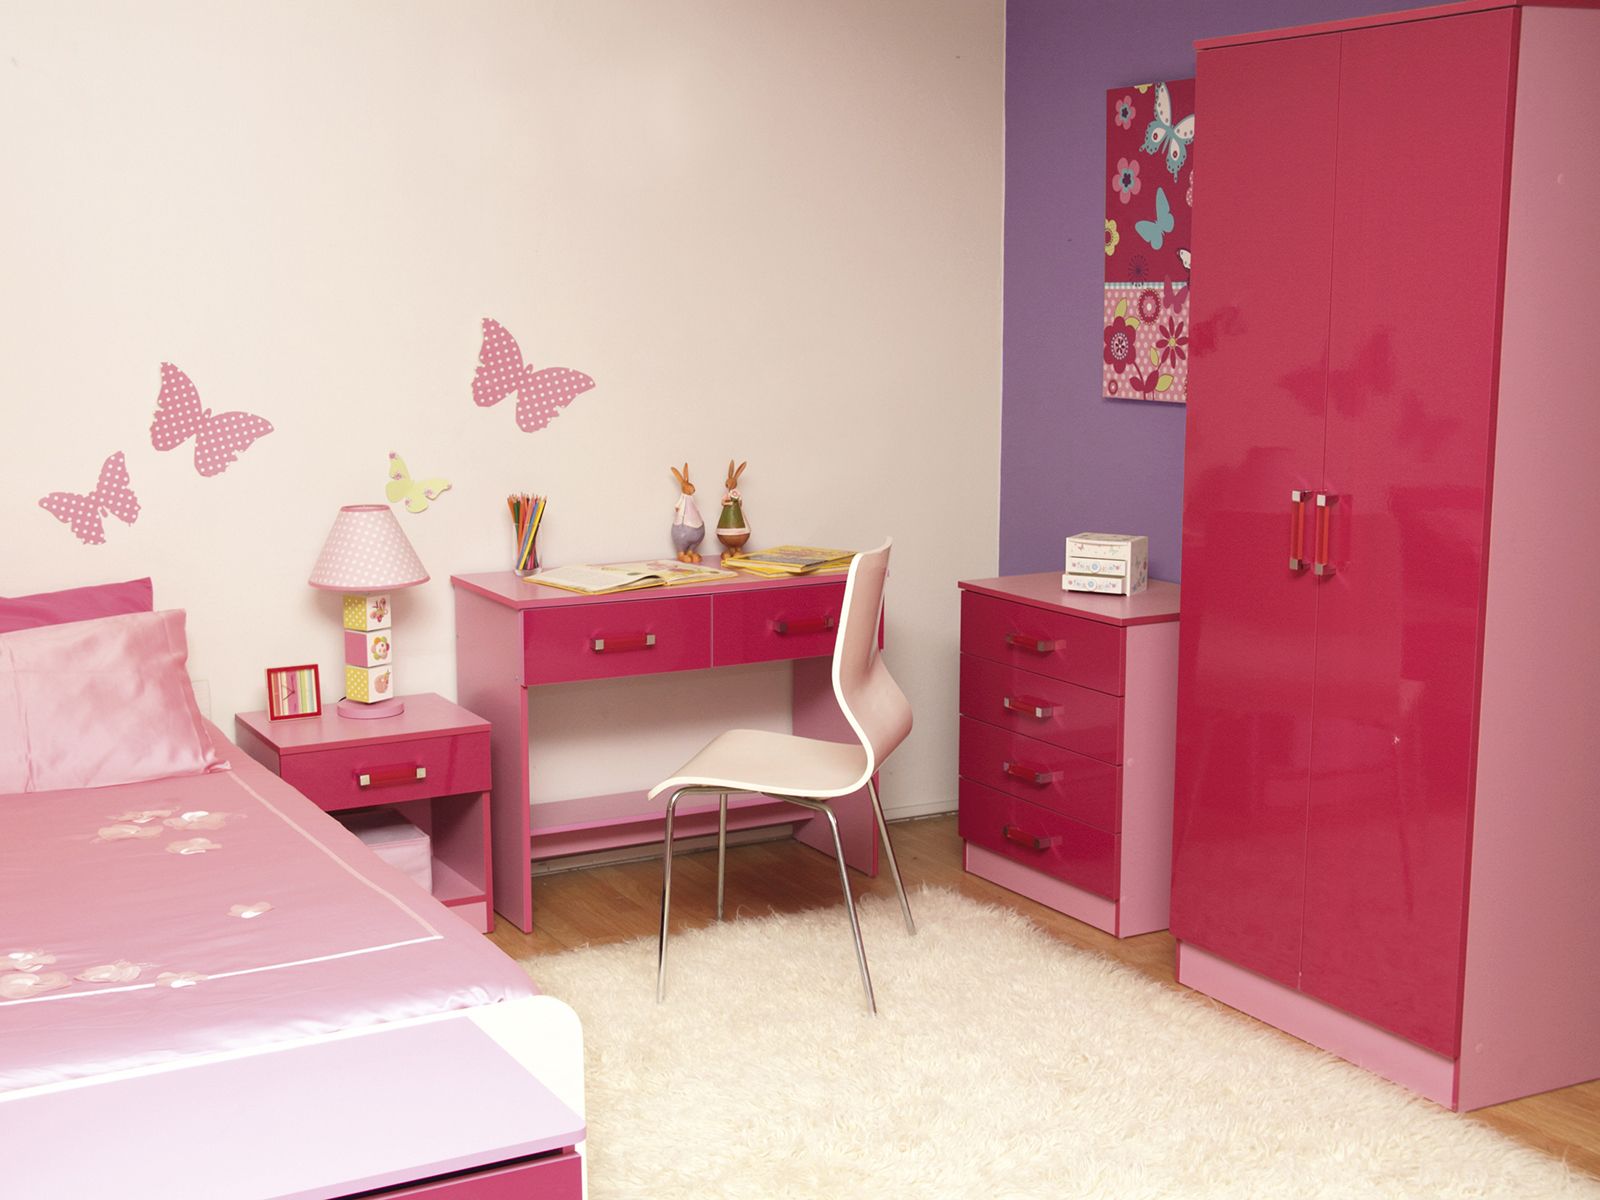 Pink Color Teenage Breathtaking Pink Color Ideas Of Teenage Bedroom Applying Girls Bedroom Furniture By Bed And Nightstand With Night Lamp And Completed With Desk Sets Bedroom Girls Bedroom Furniture: The Beach Condo Ideas